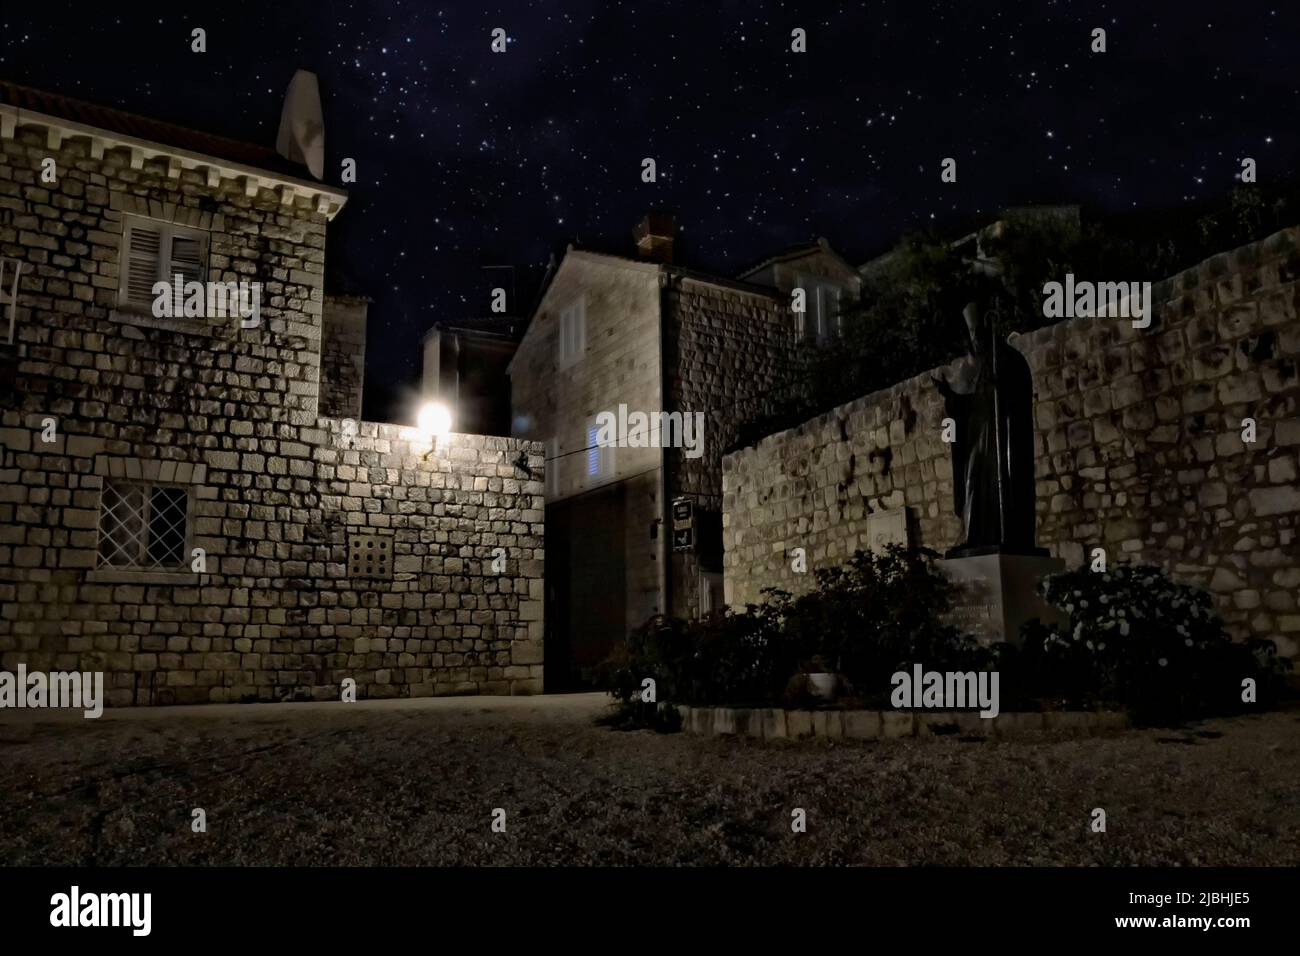 Stone house in the Croatian town of Trogir. Lamps and stars shine beautifully. Stock Photo